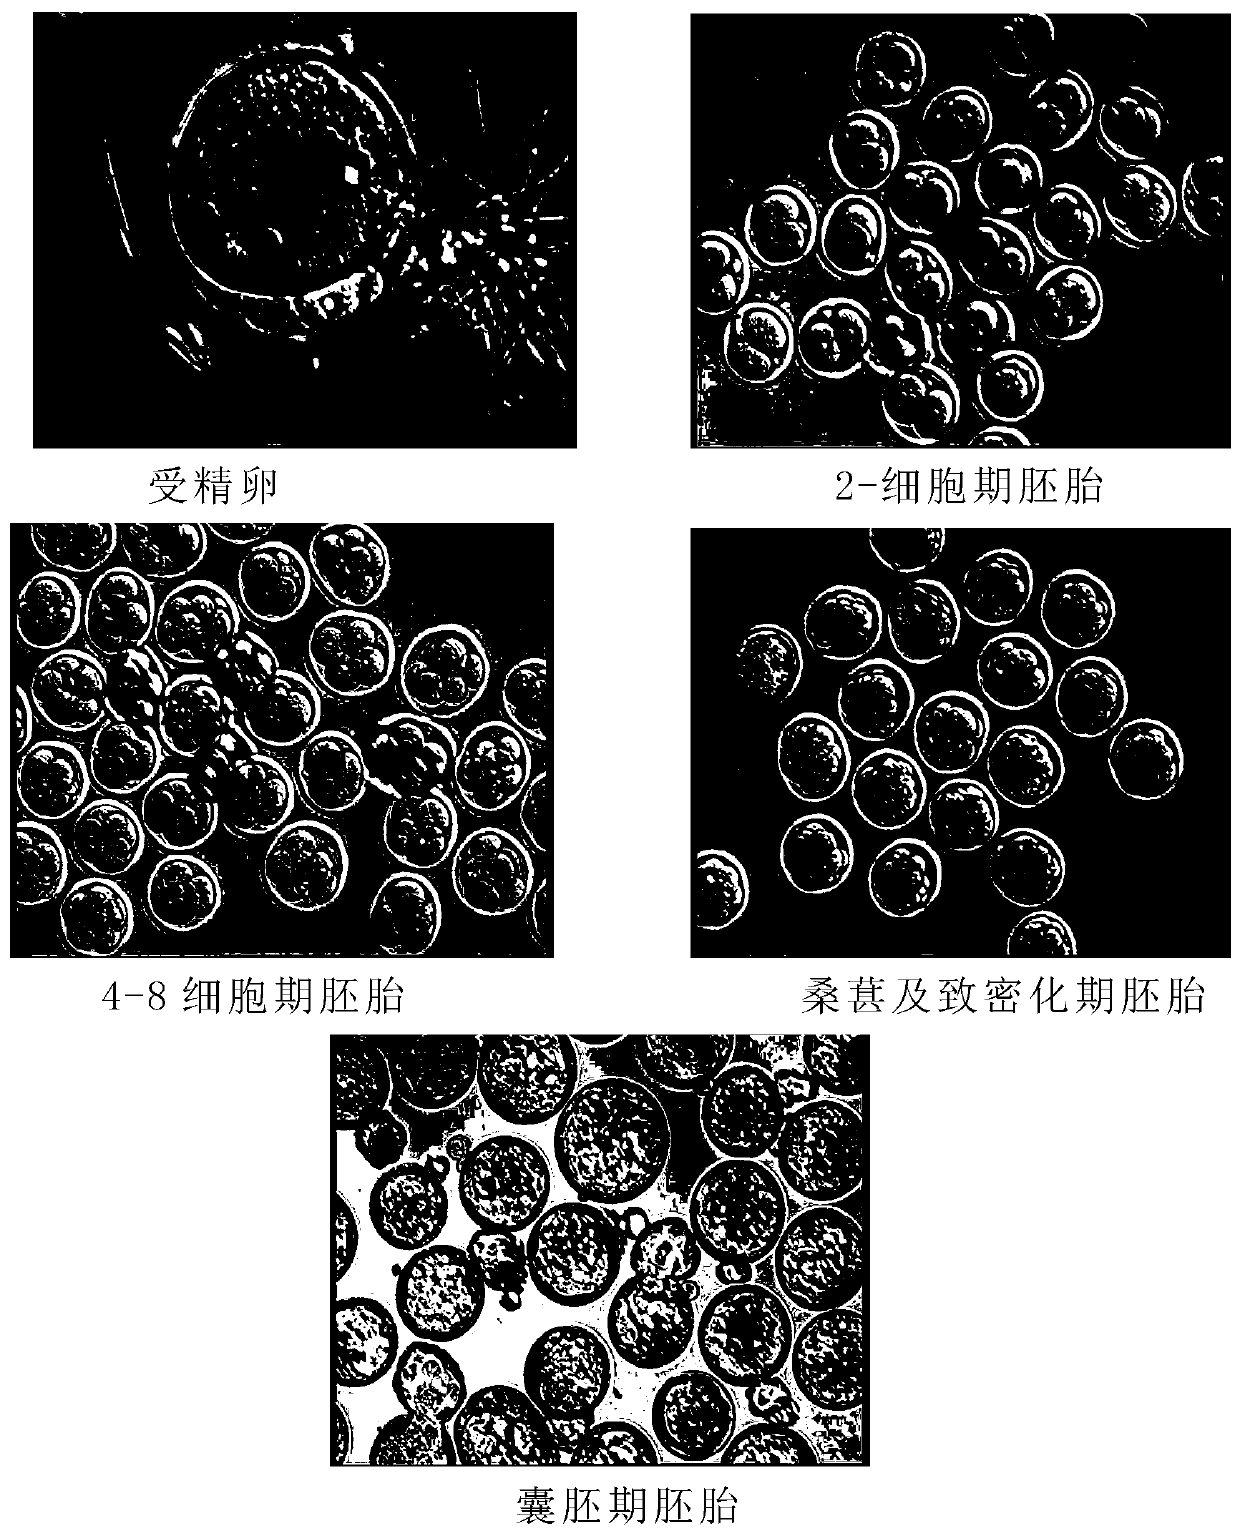 Method for breeding ICR mice in high blastocyst formation rate